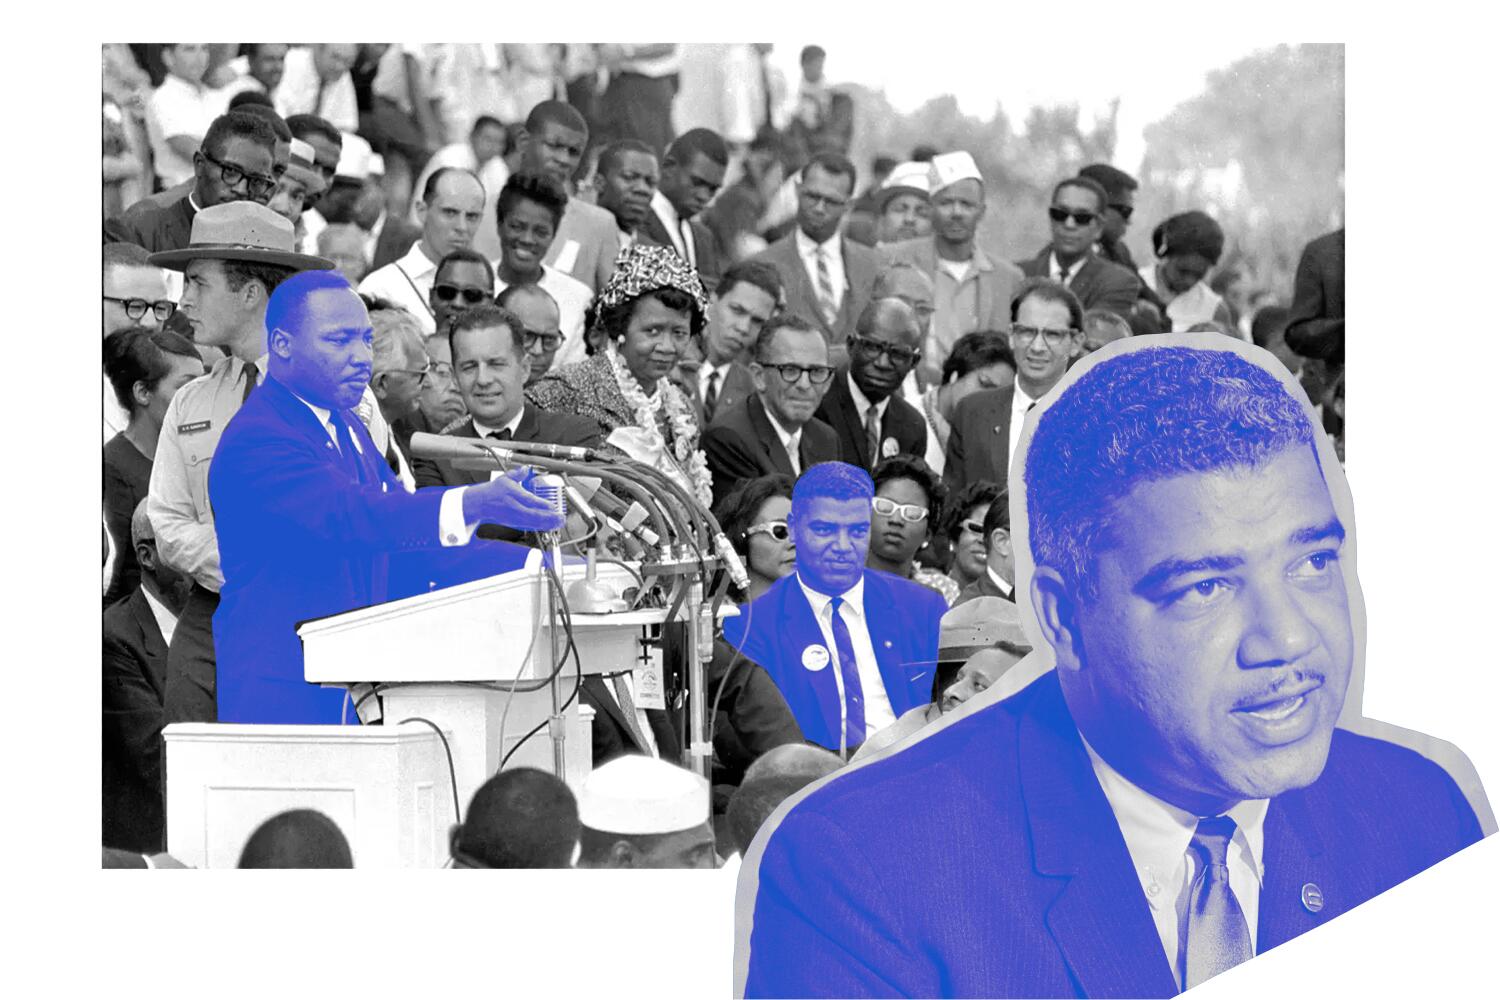 My Uncle Whitney helped organize the March on Washington. He persevered for justice. So can we  